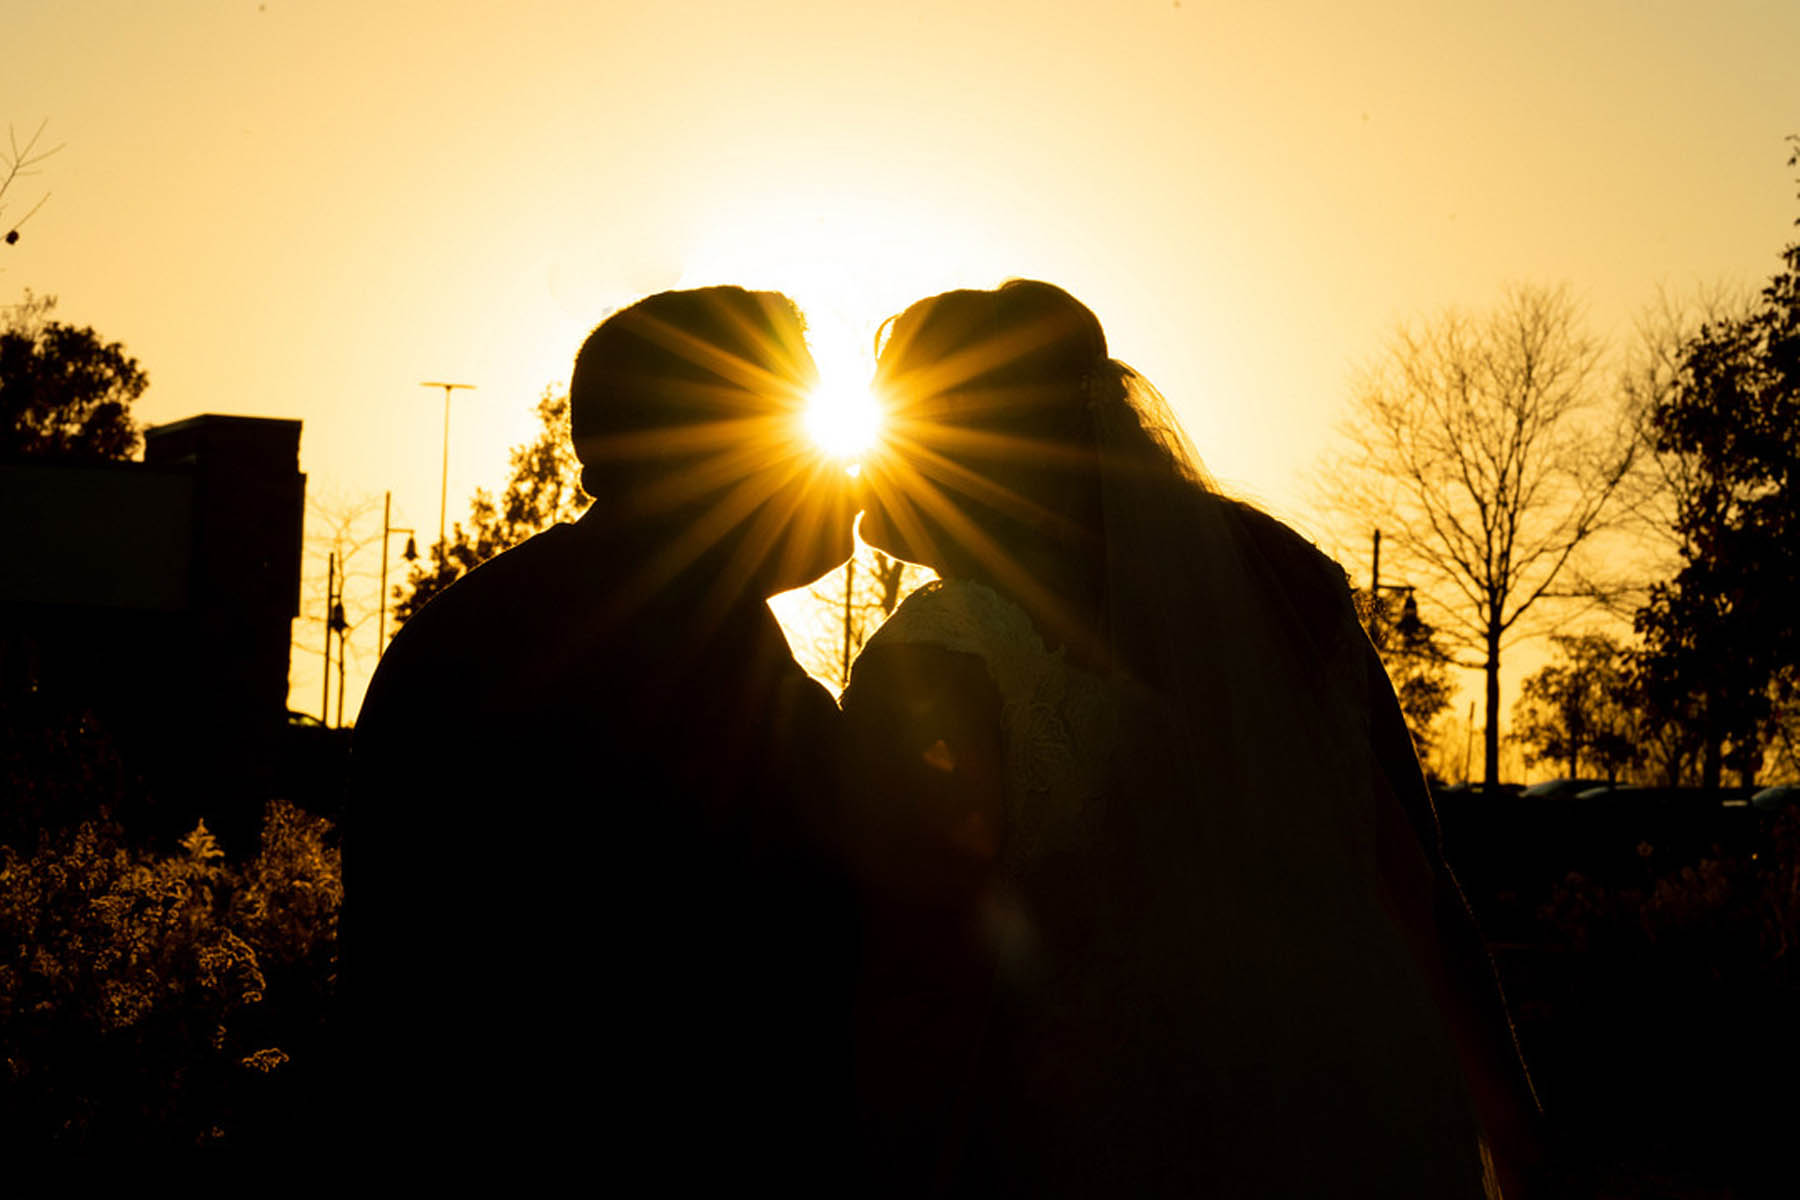 Two figures share a kiss with the setting sun between then, creating a lens flar at the center point between them.